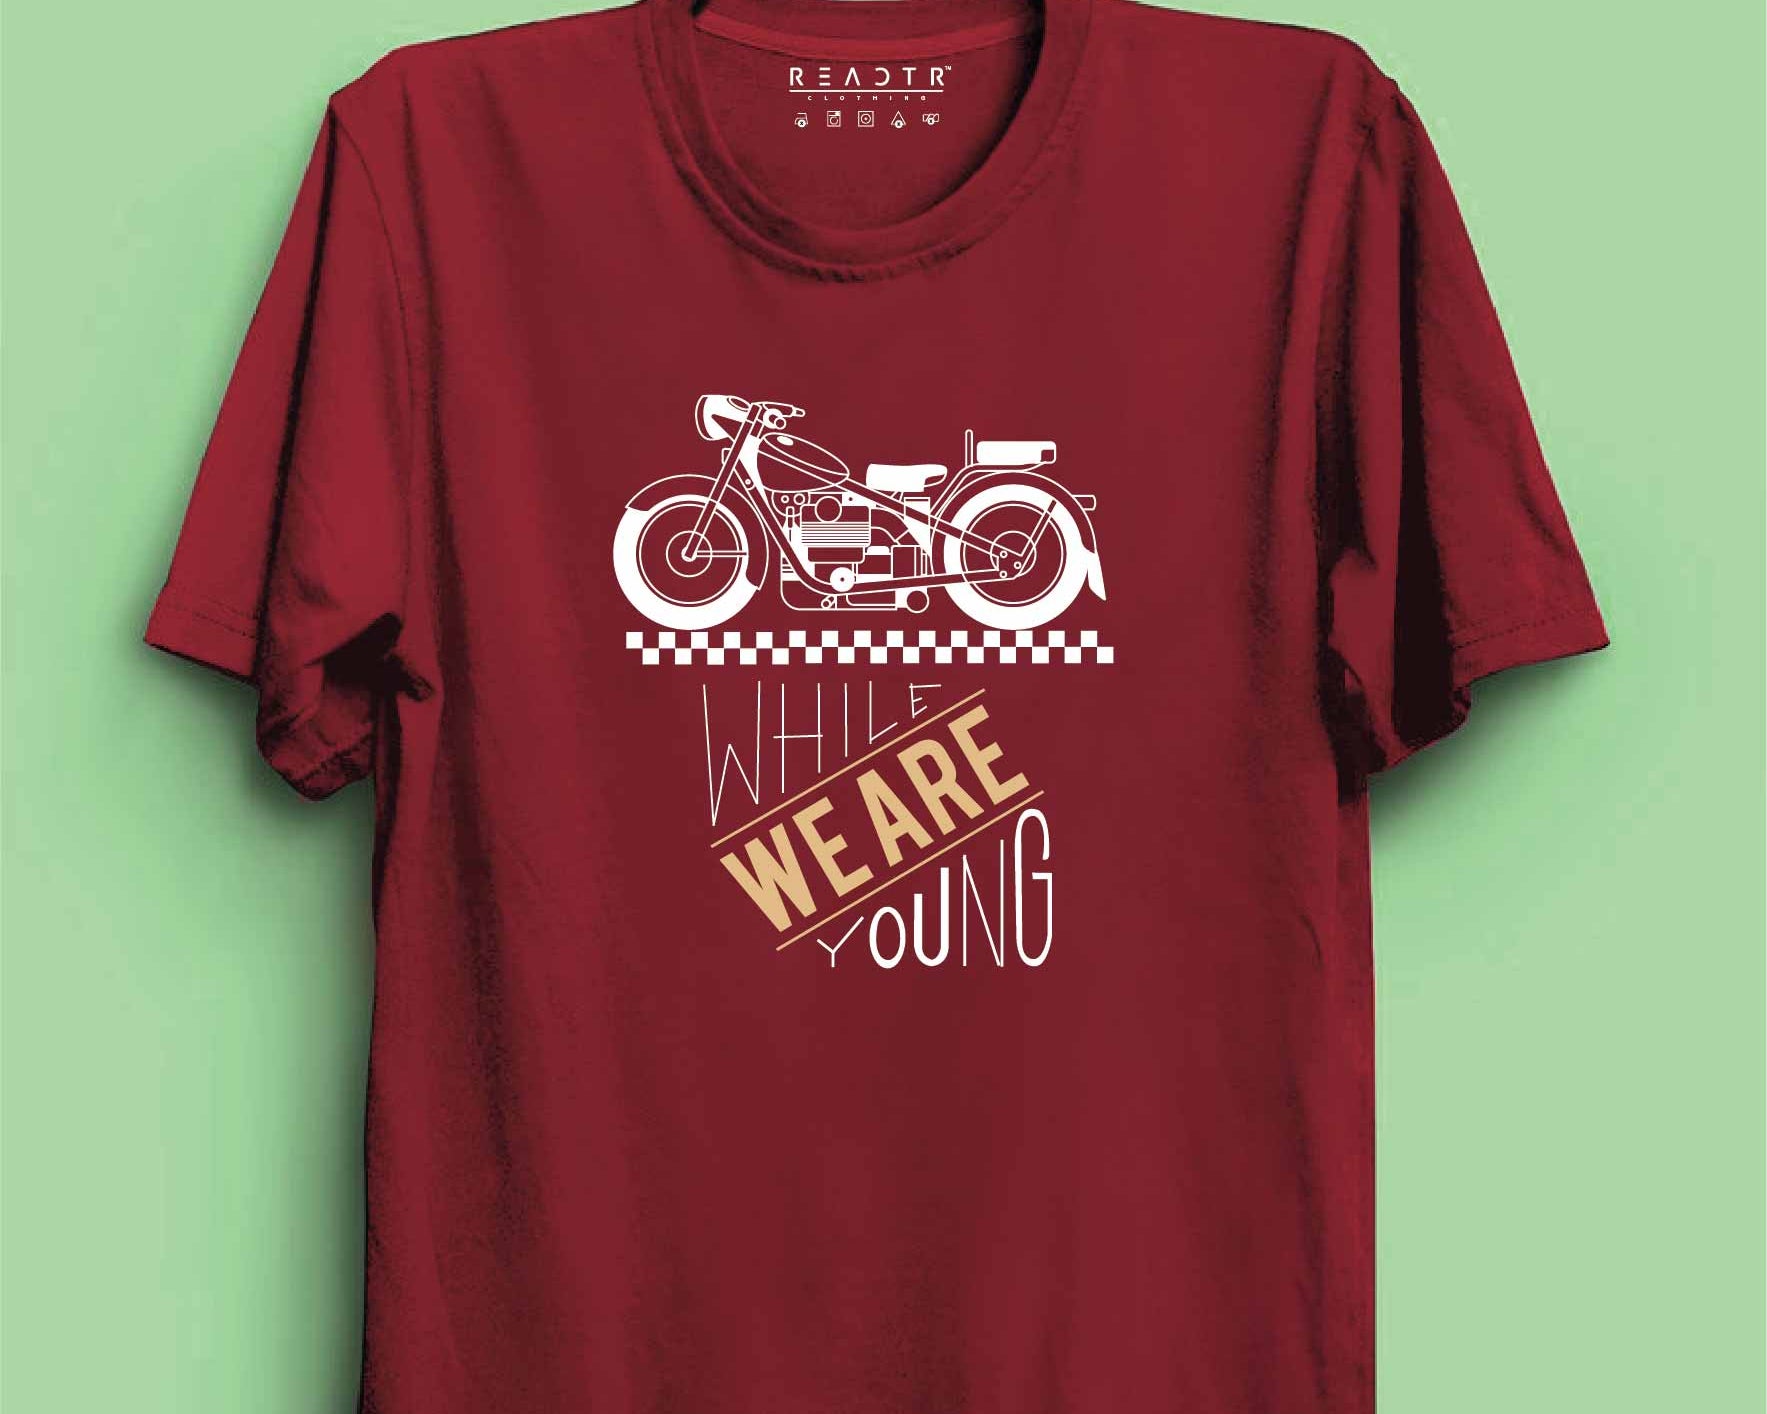 While We are Young Reactr Tshirts For Men - Eyewearlabs